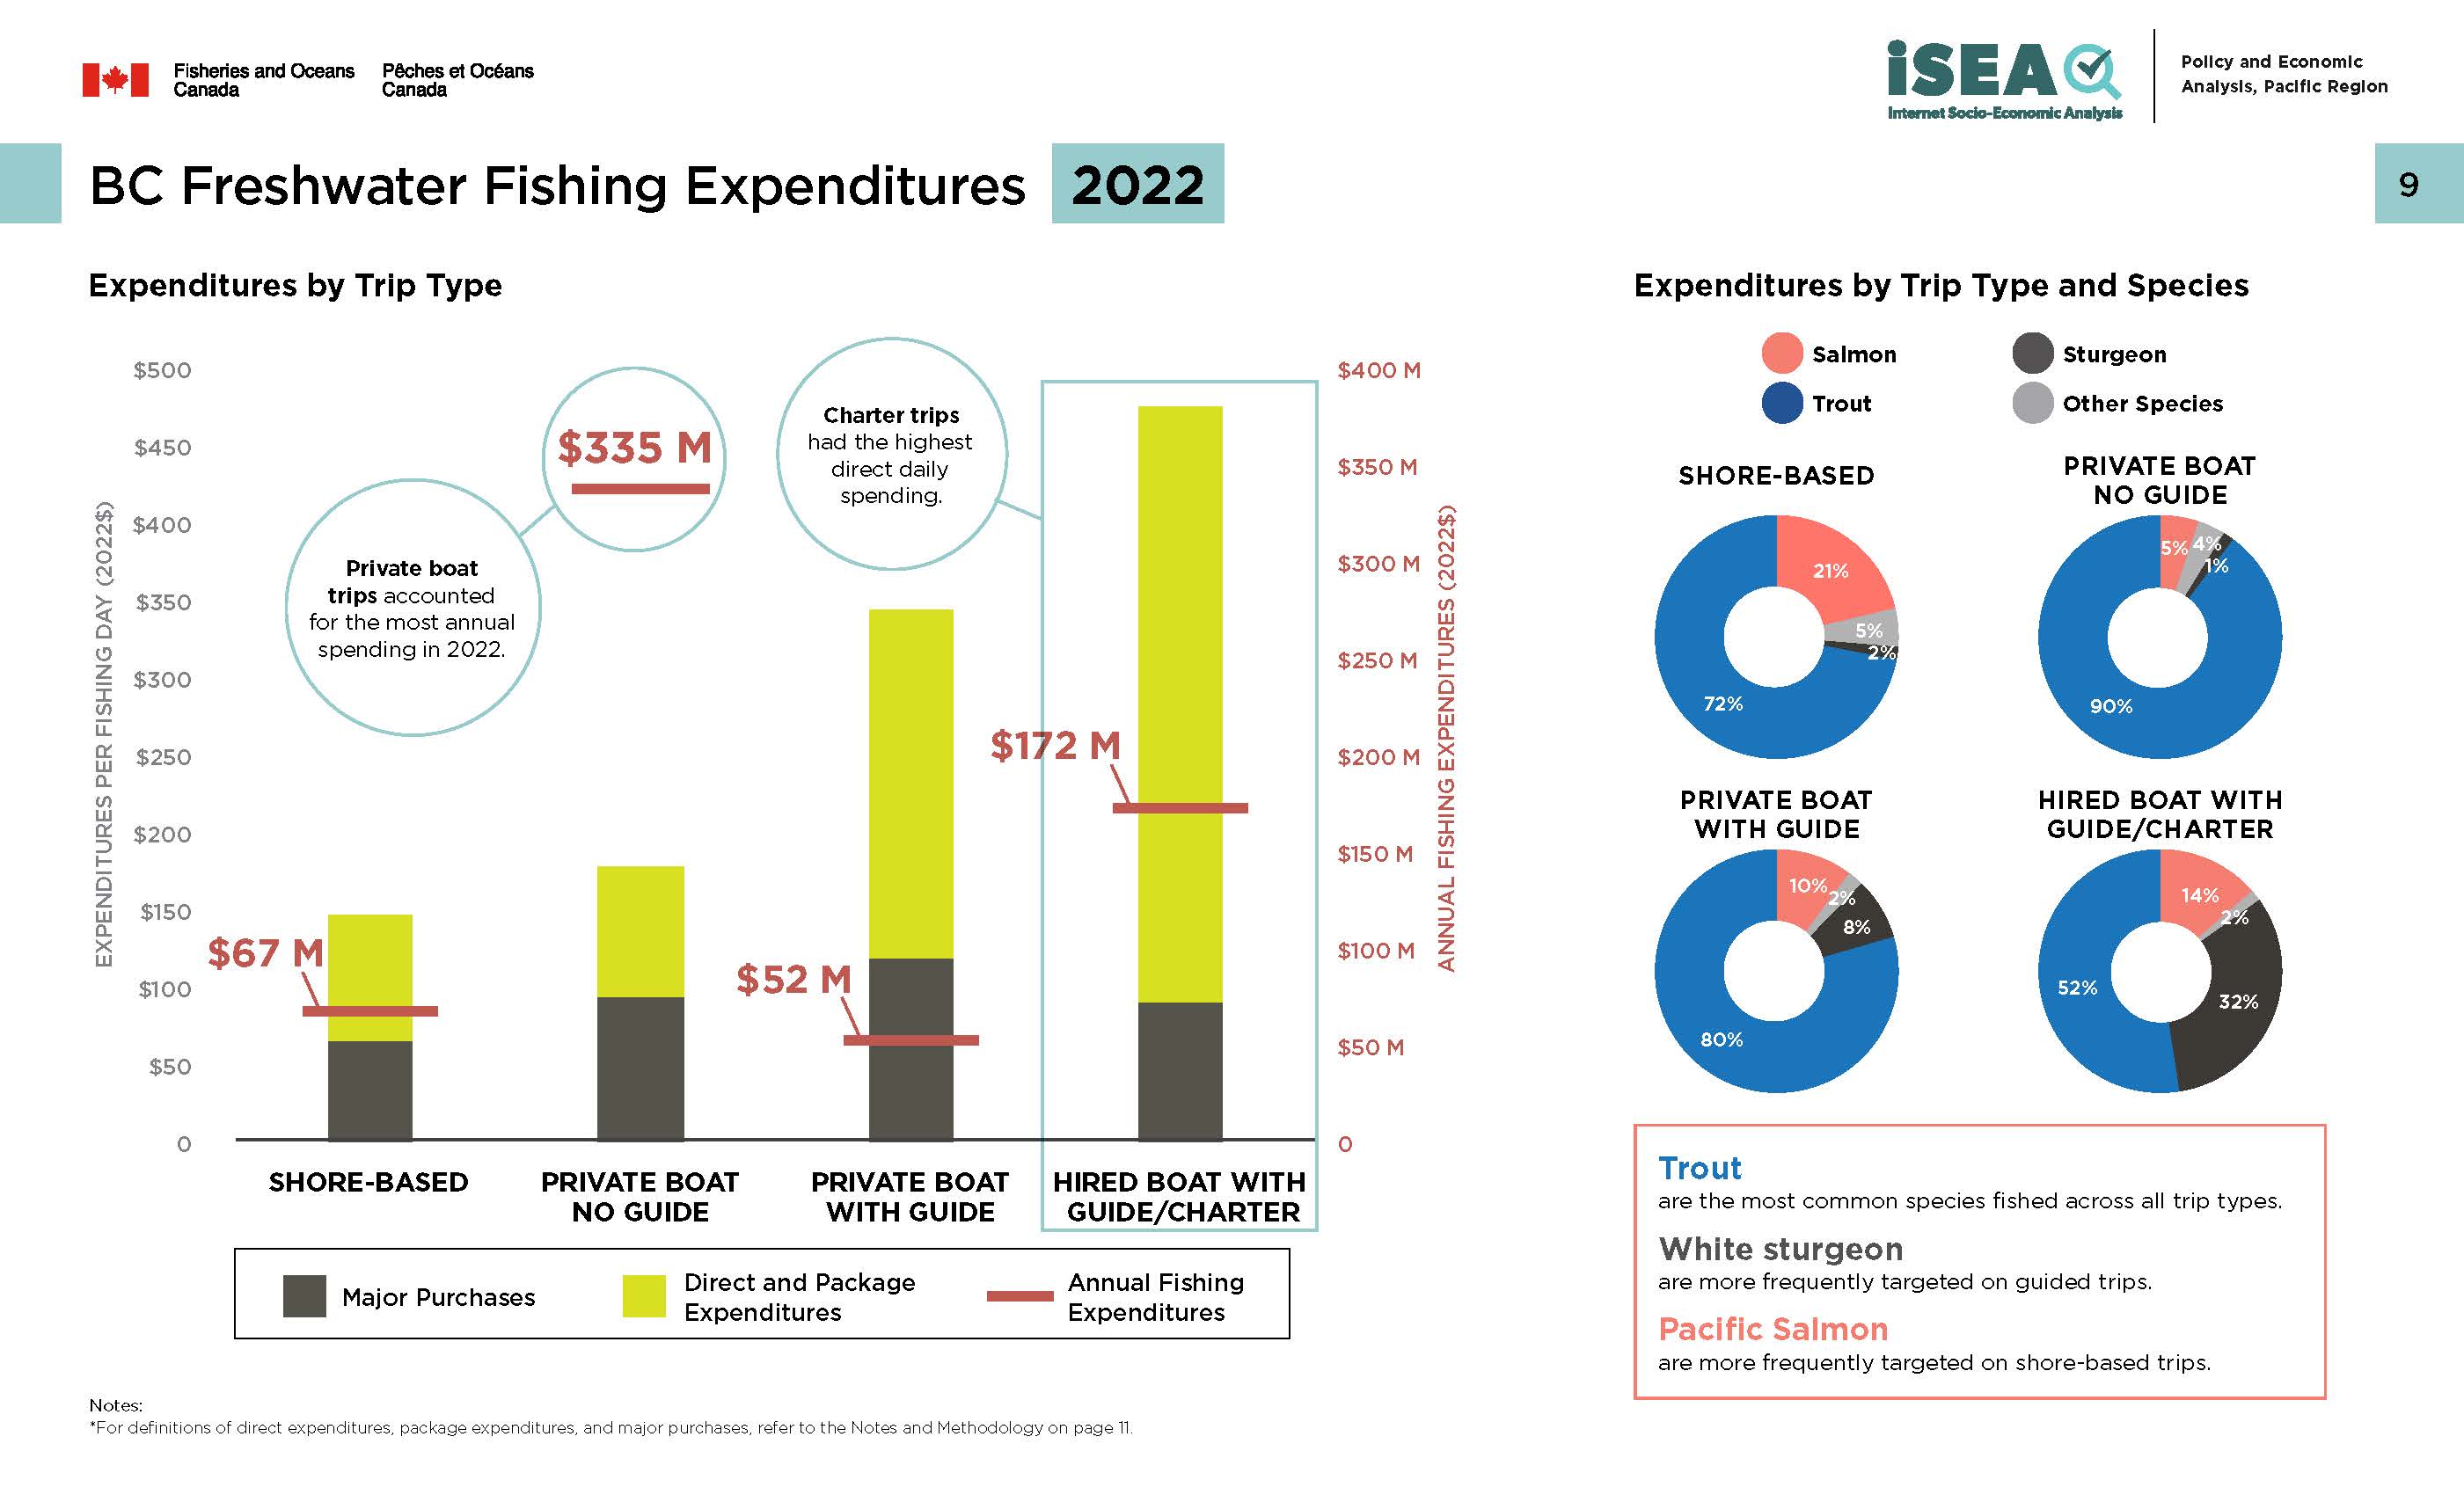 Photo: infographic of BC freshwater fishing expenditures, 2022